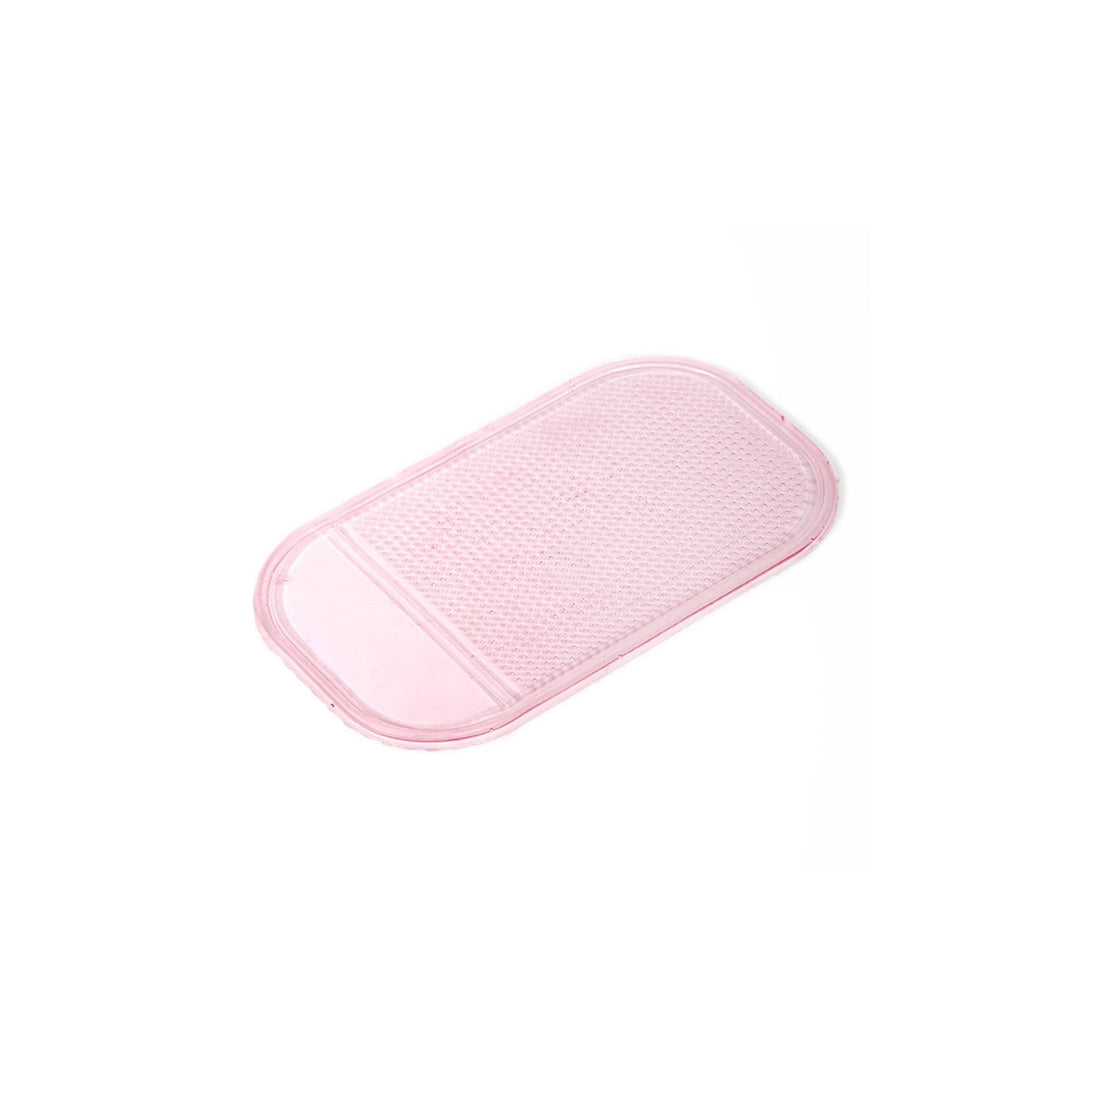 Set of Two Non Slip Dashboard Pads - Clear, Black, Blue or Pink